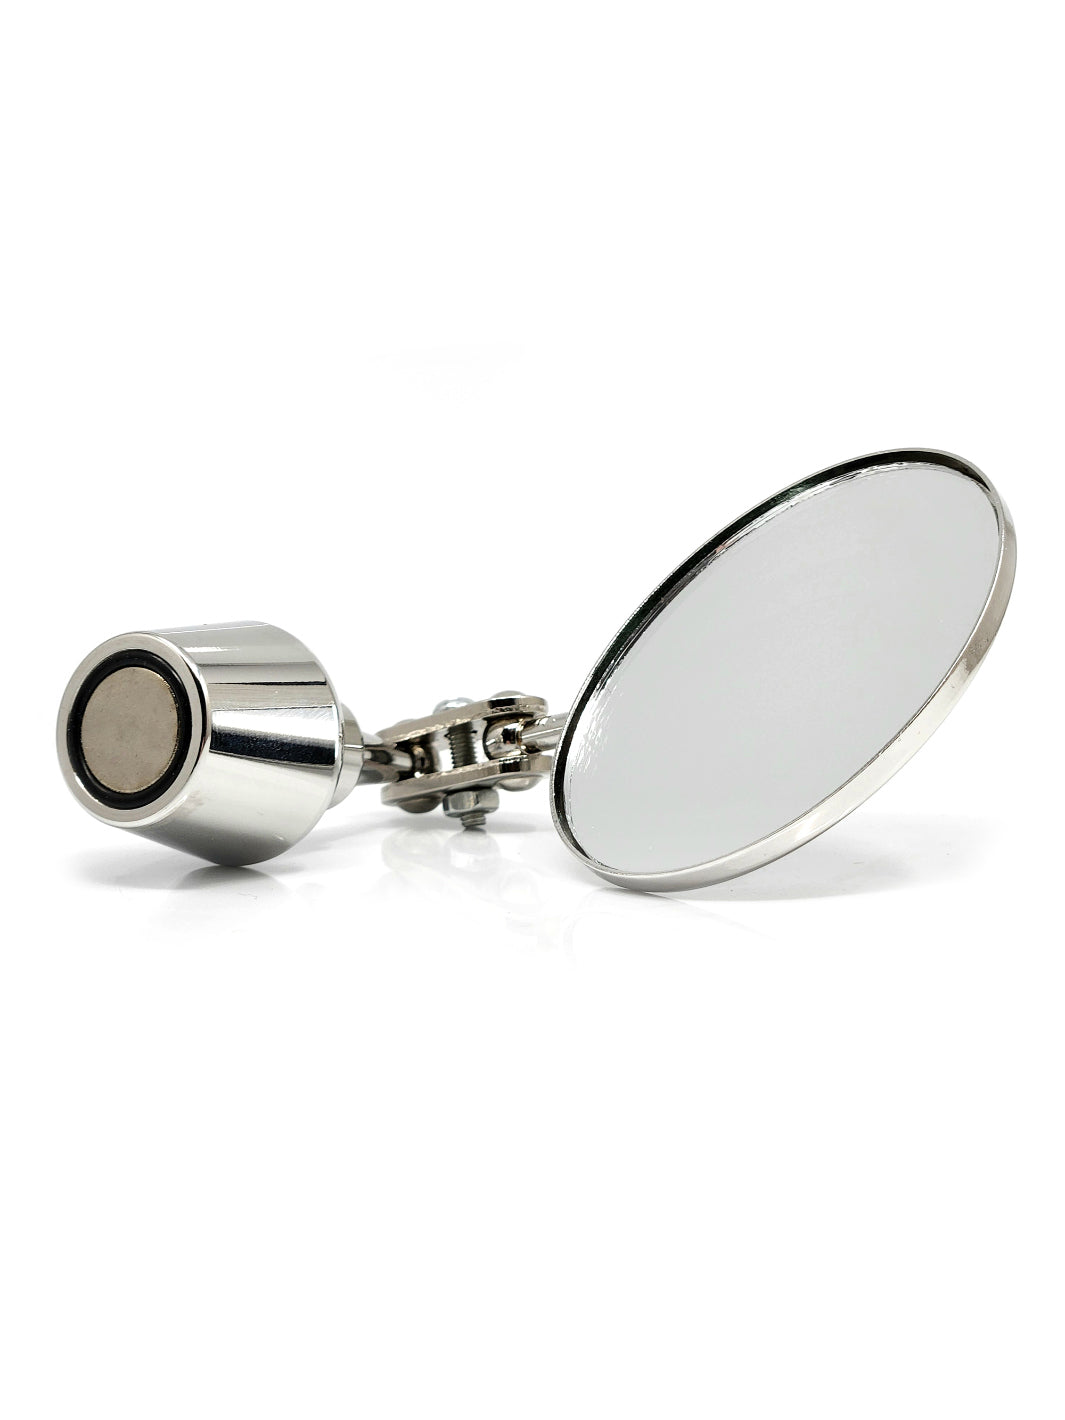 FLAIR Magnetic Articulating Shot Mirror